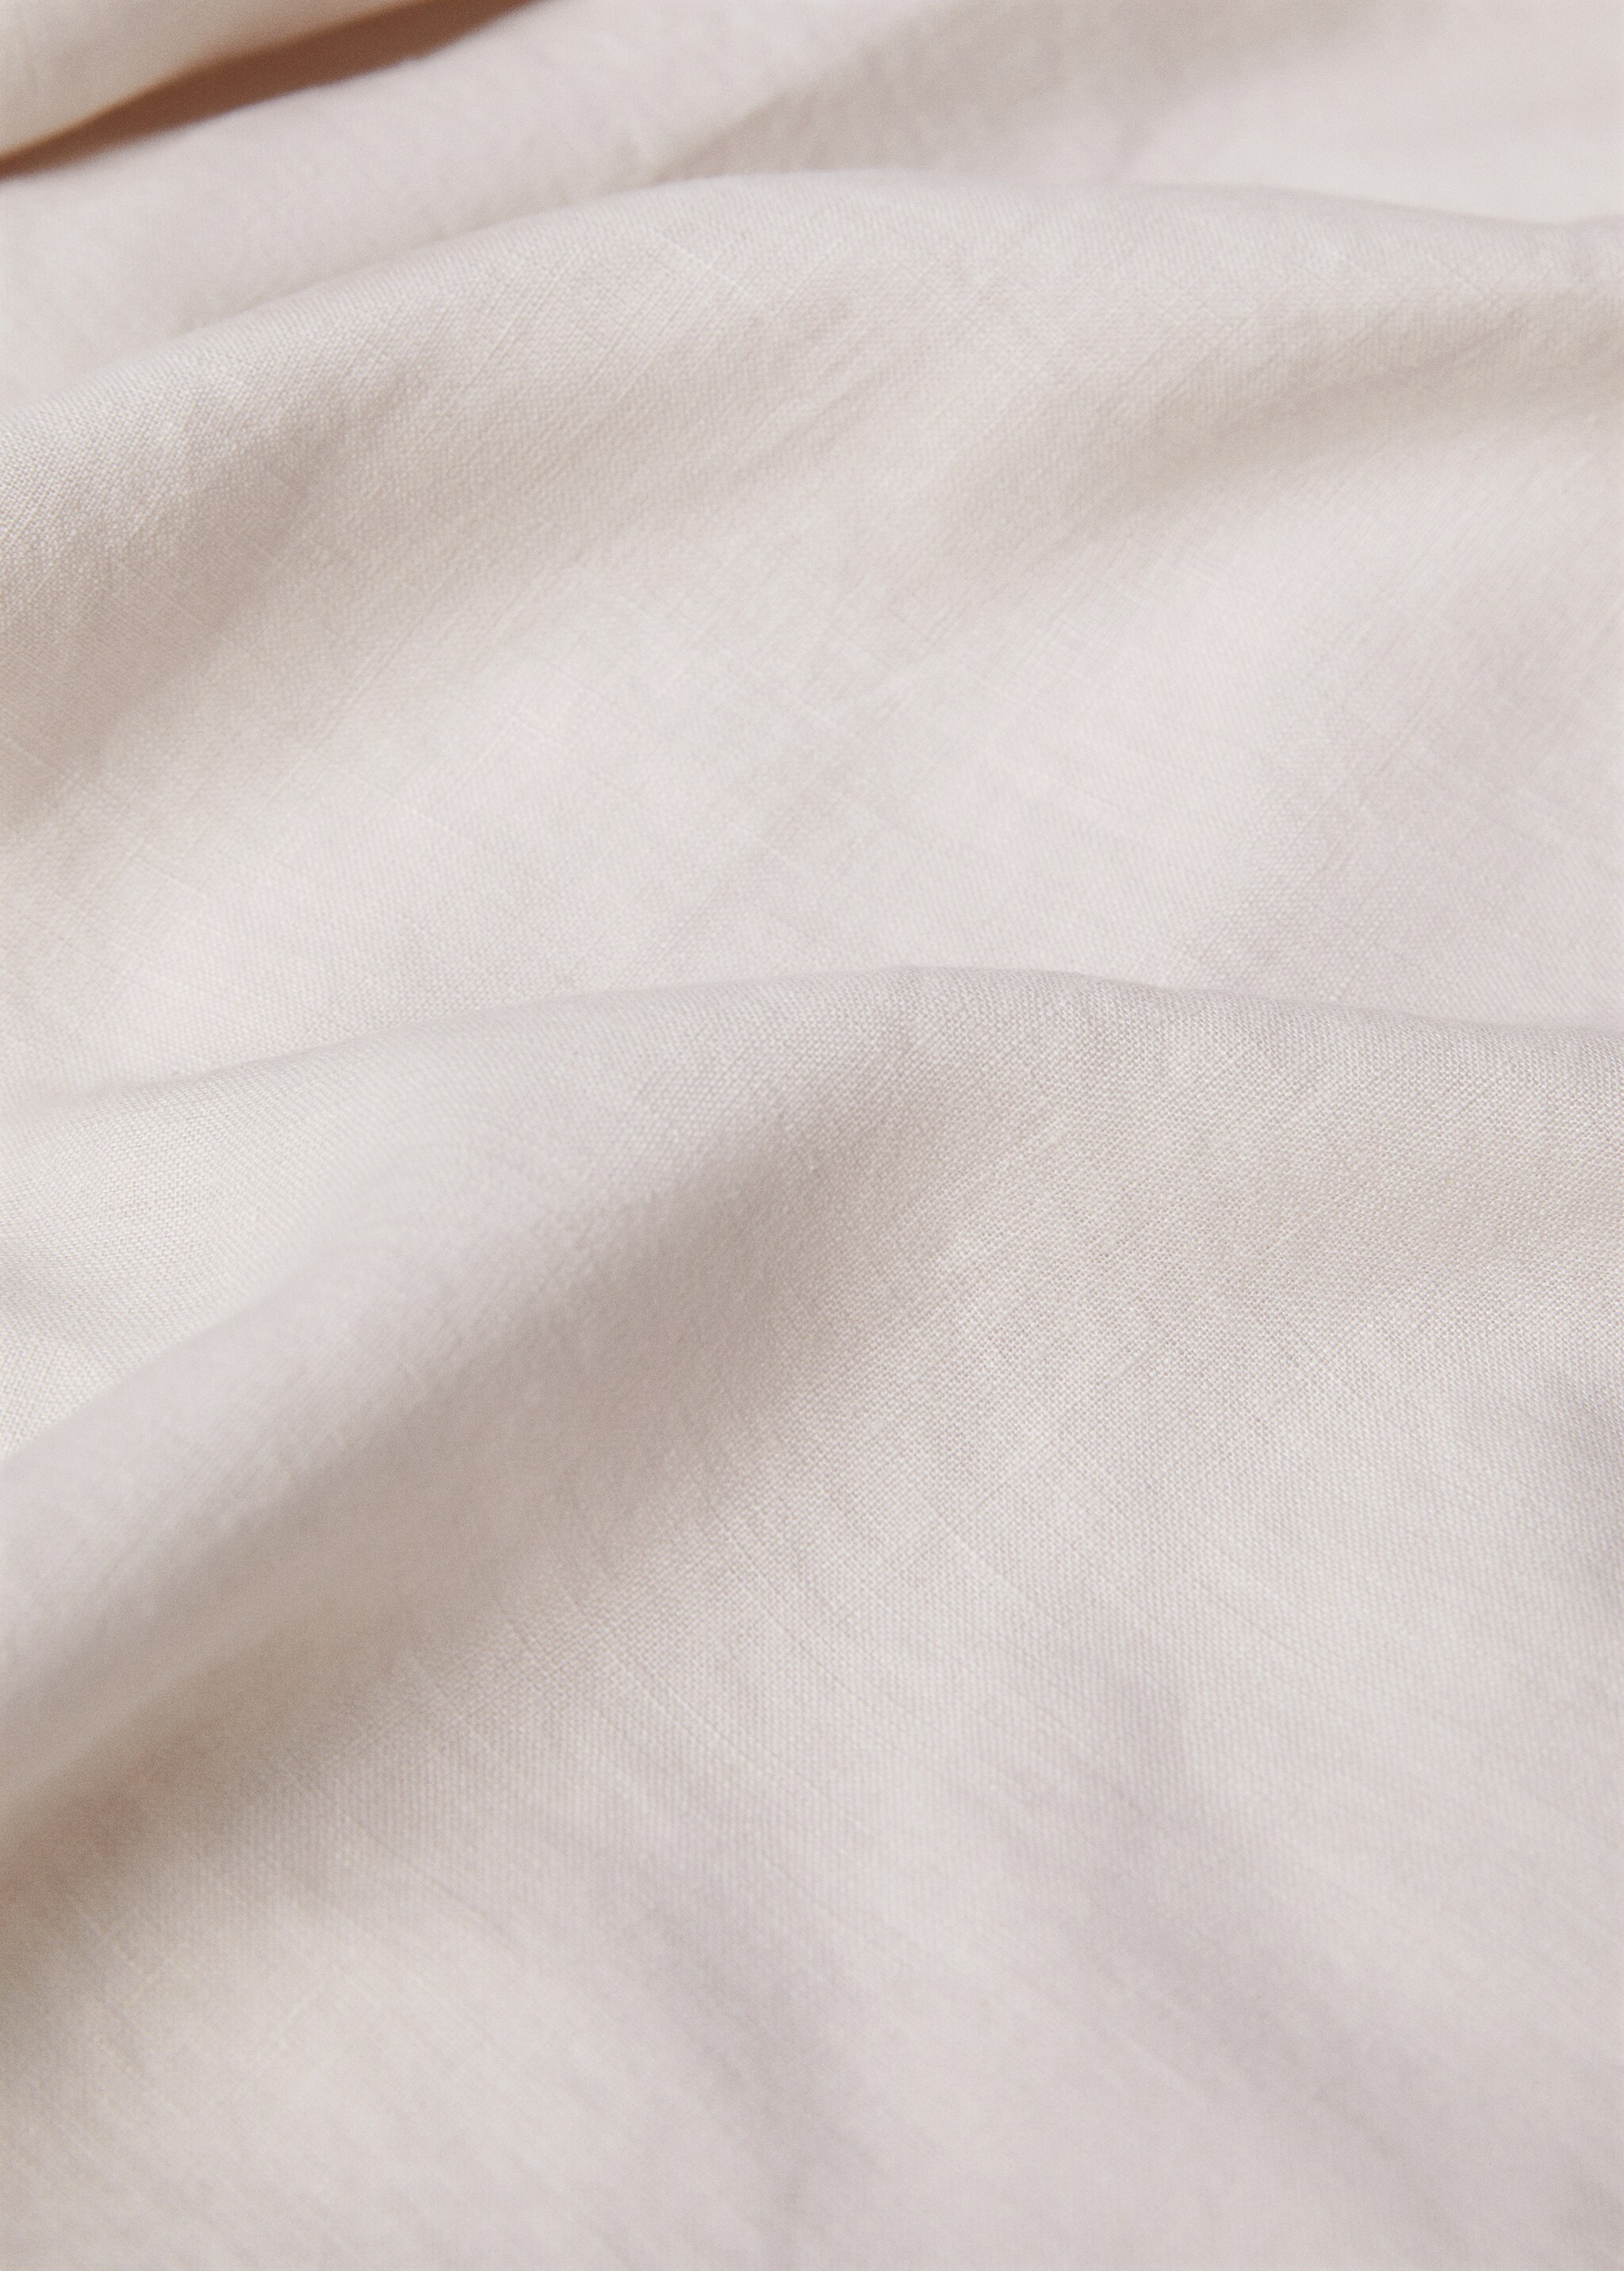 100% linen duvet cover king bed - Details of the article 2